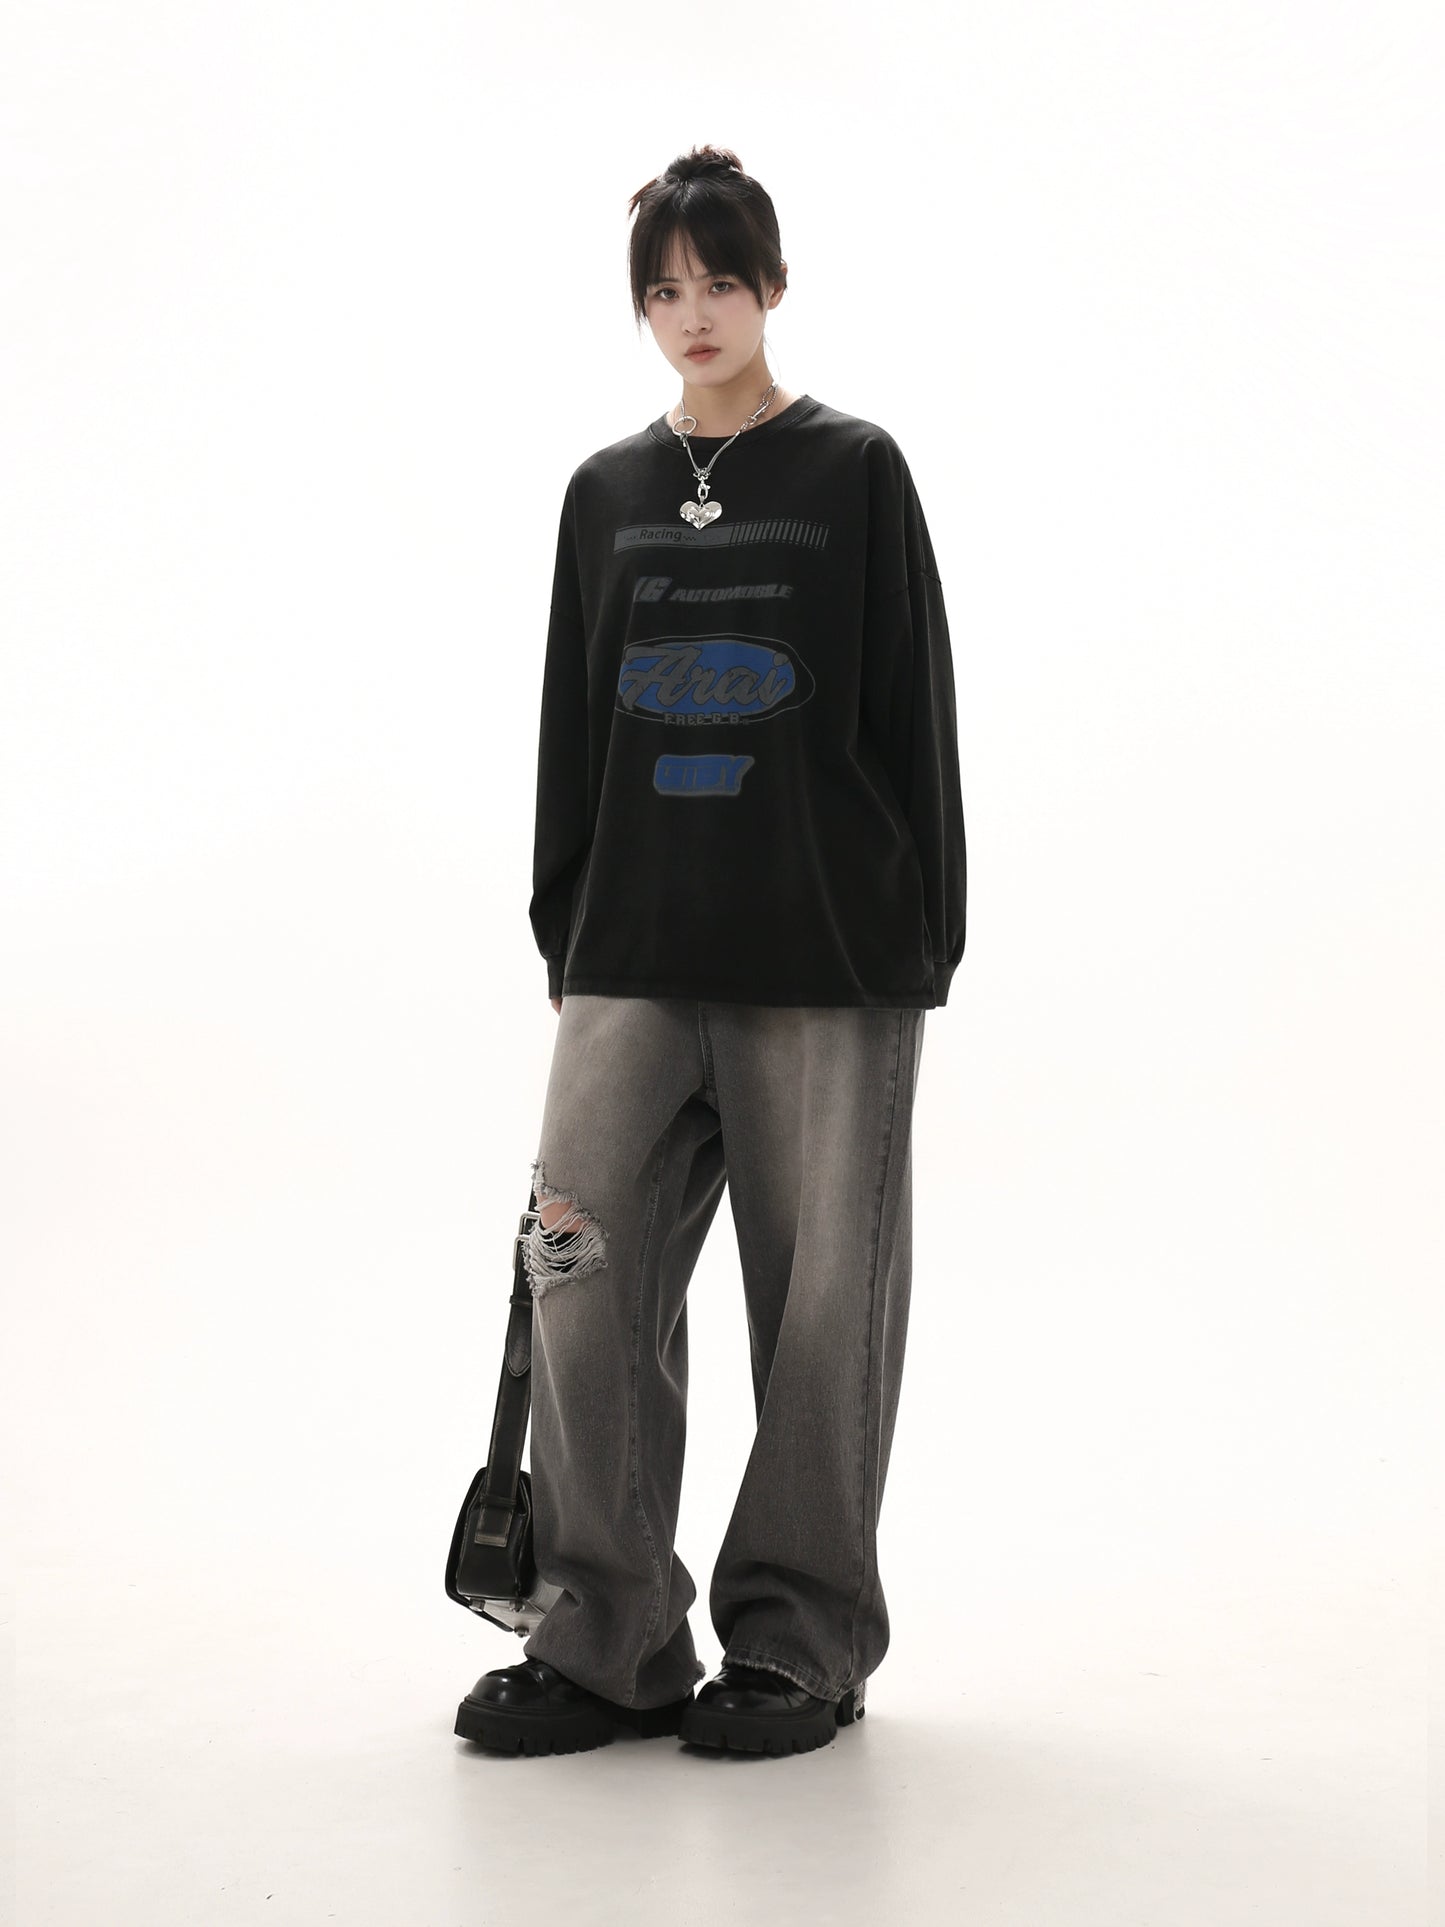 GIBBYCNA American Vintage Washed Straight Jeans Men's and Women's Trendy Loose Wide-leg Trousers High Waist Ripped Holes